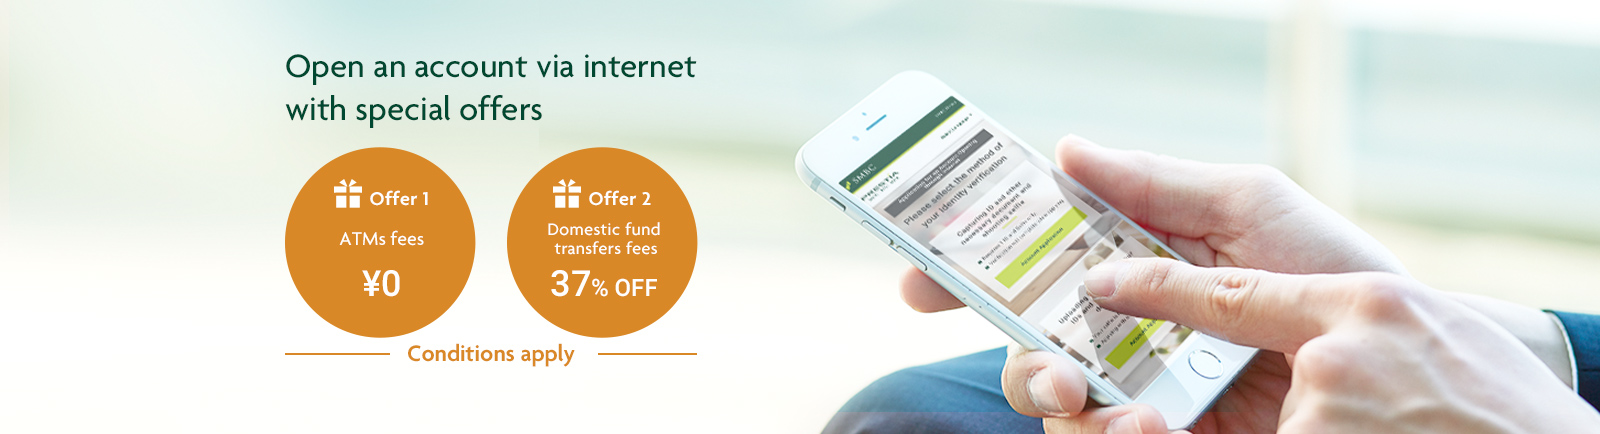 Open an account via internet with special offers offers1 ATMs fees ¥0 offers2 Domestic fund transfers fees 37% OFF Conditions apply